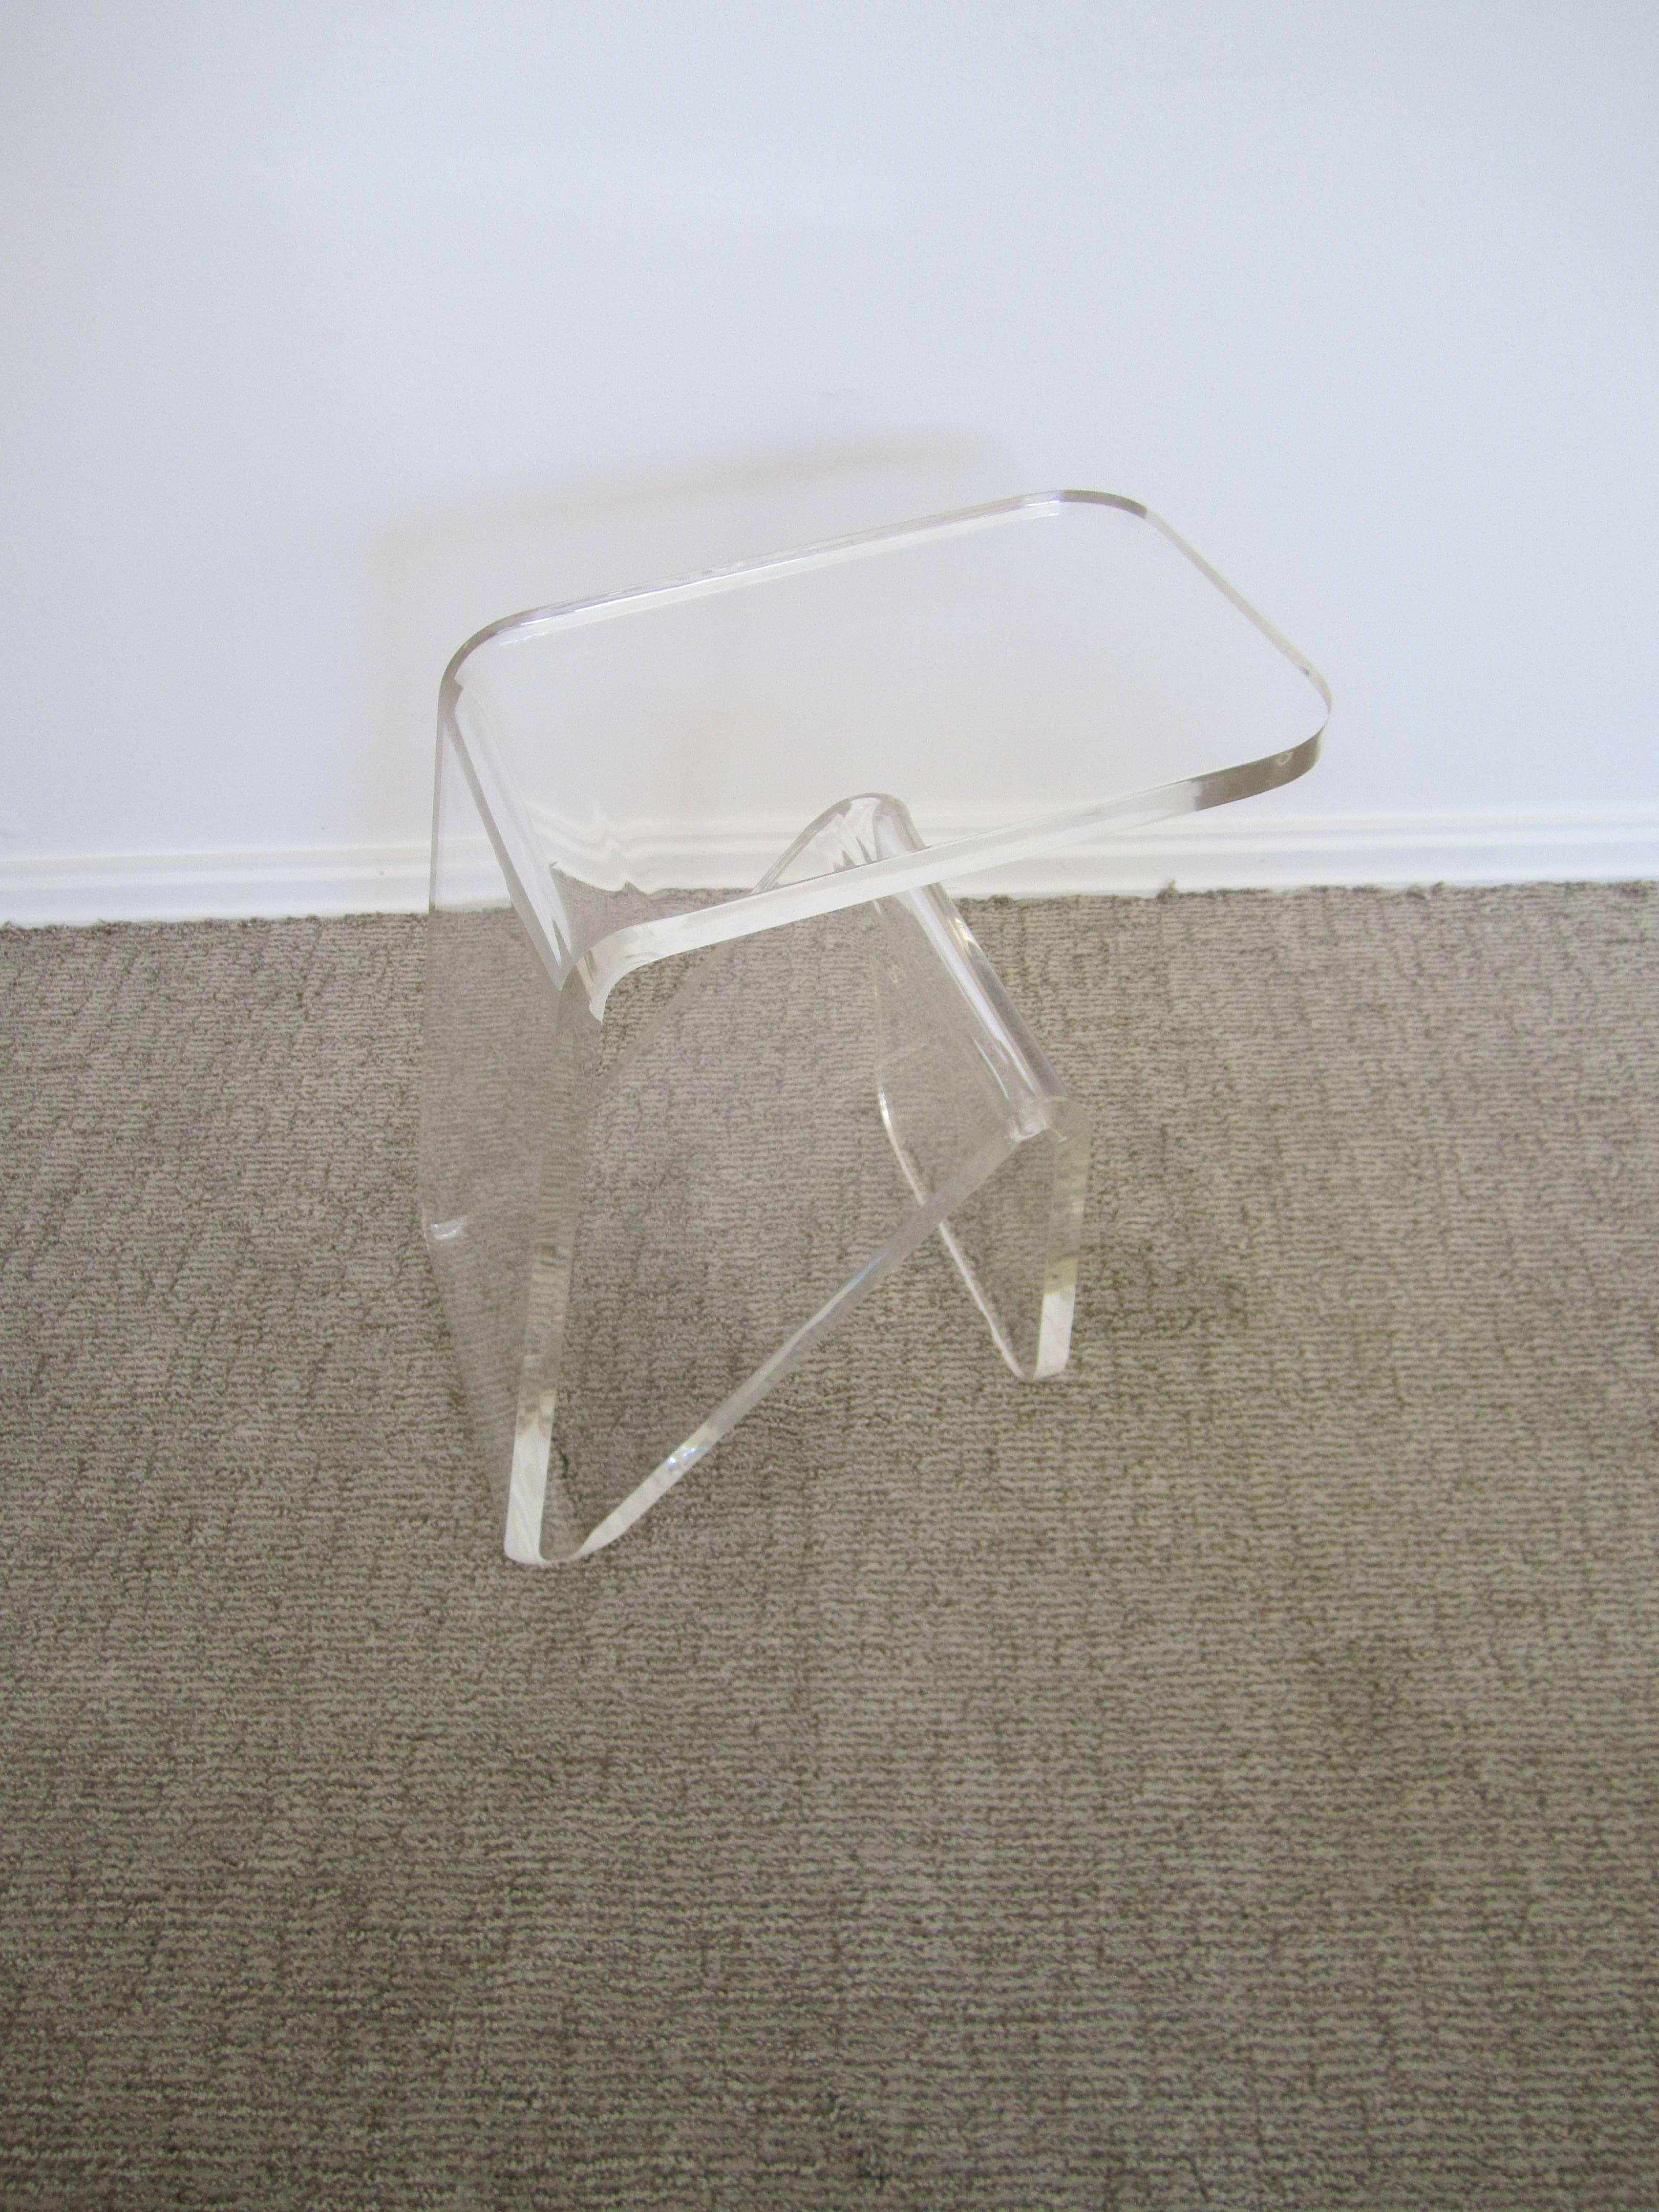 A conveniently sized vintage modern Lucite side or drinks table with strategic 'bend' that can hold magazines, papers, or a book, in the style of designer John Mascheroni. Table is constructed of one single piece of Lucite at 3/4 in. thick. Very